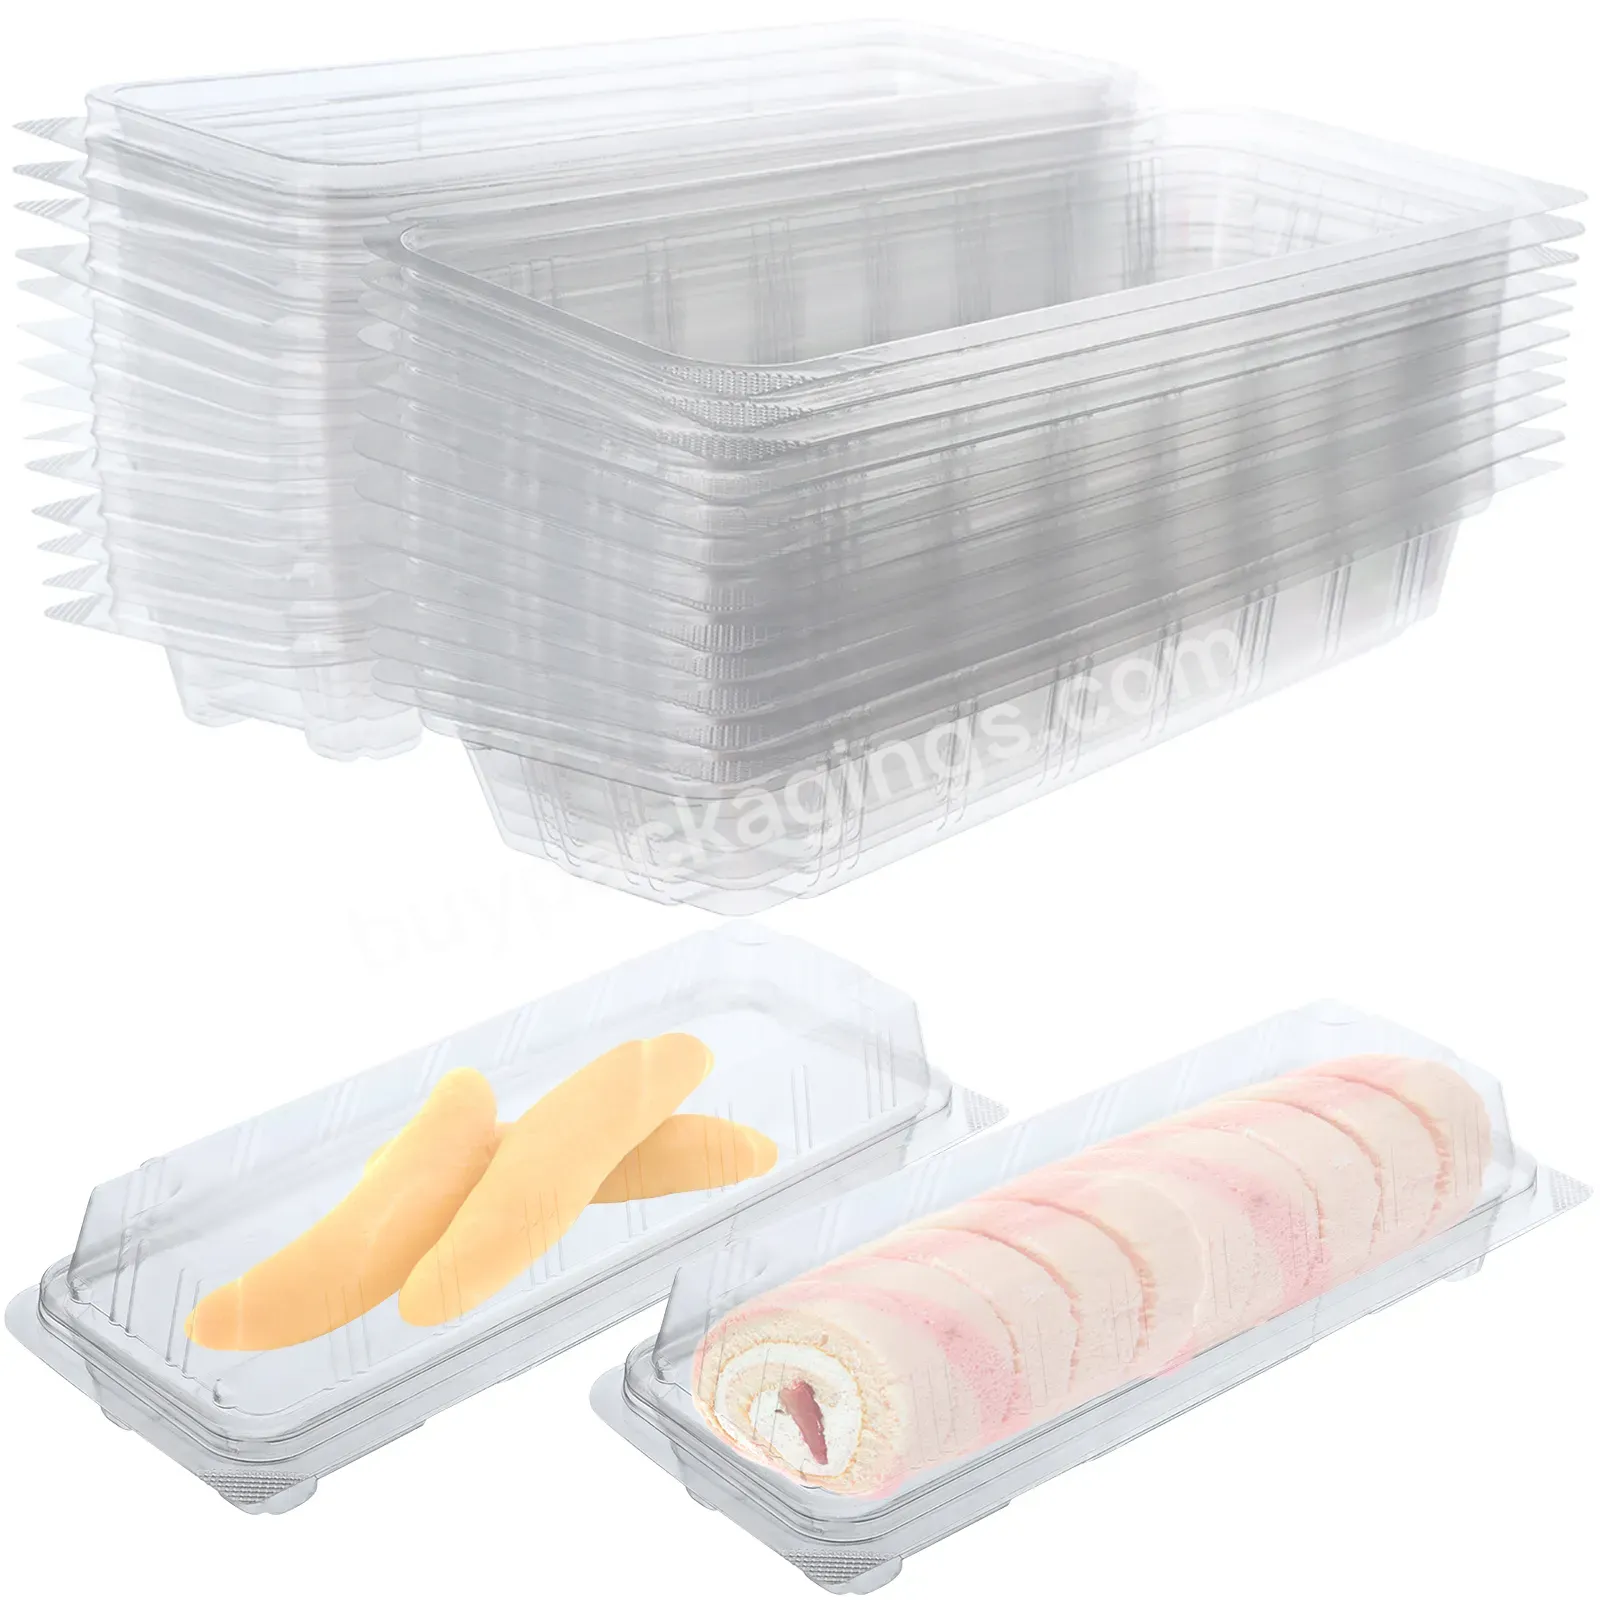 Swiss Roll Blister Packaging Box Cupcake Transparent Packaging Clear Cake Box Fruit Dessert Sushi Roll Bread Box